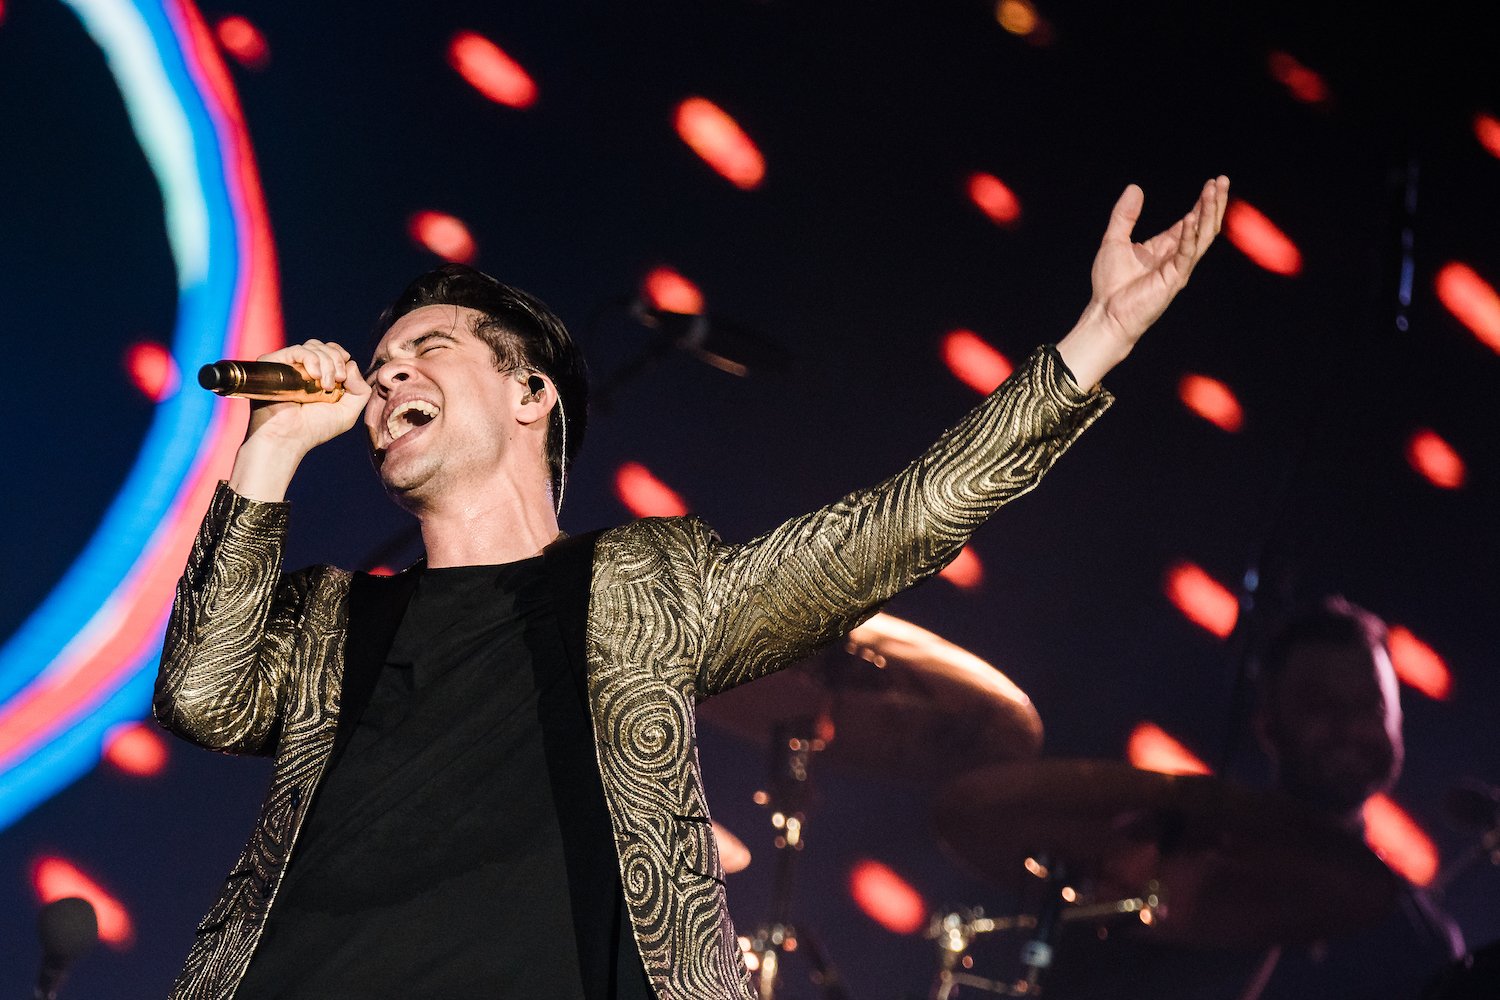 Brendon Urie of Panic at the Disco at Rock In Rio Music Festival 